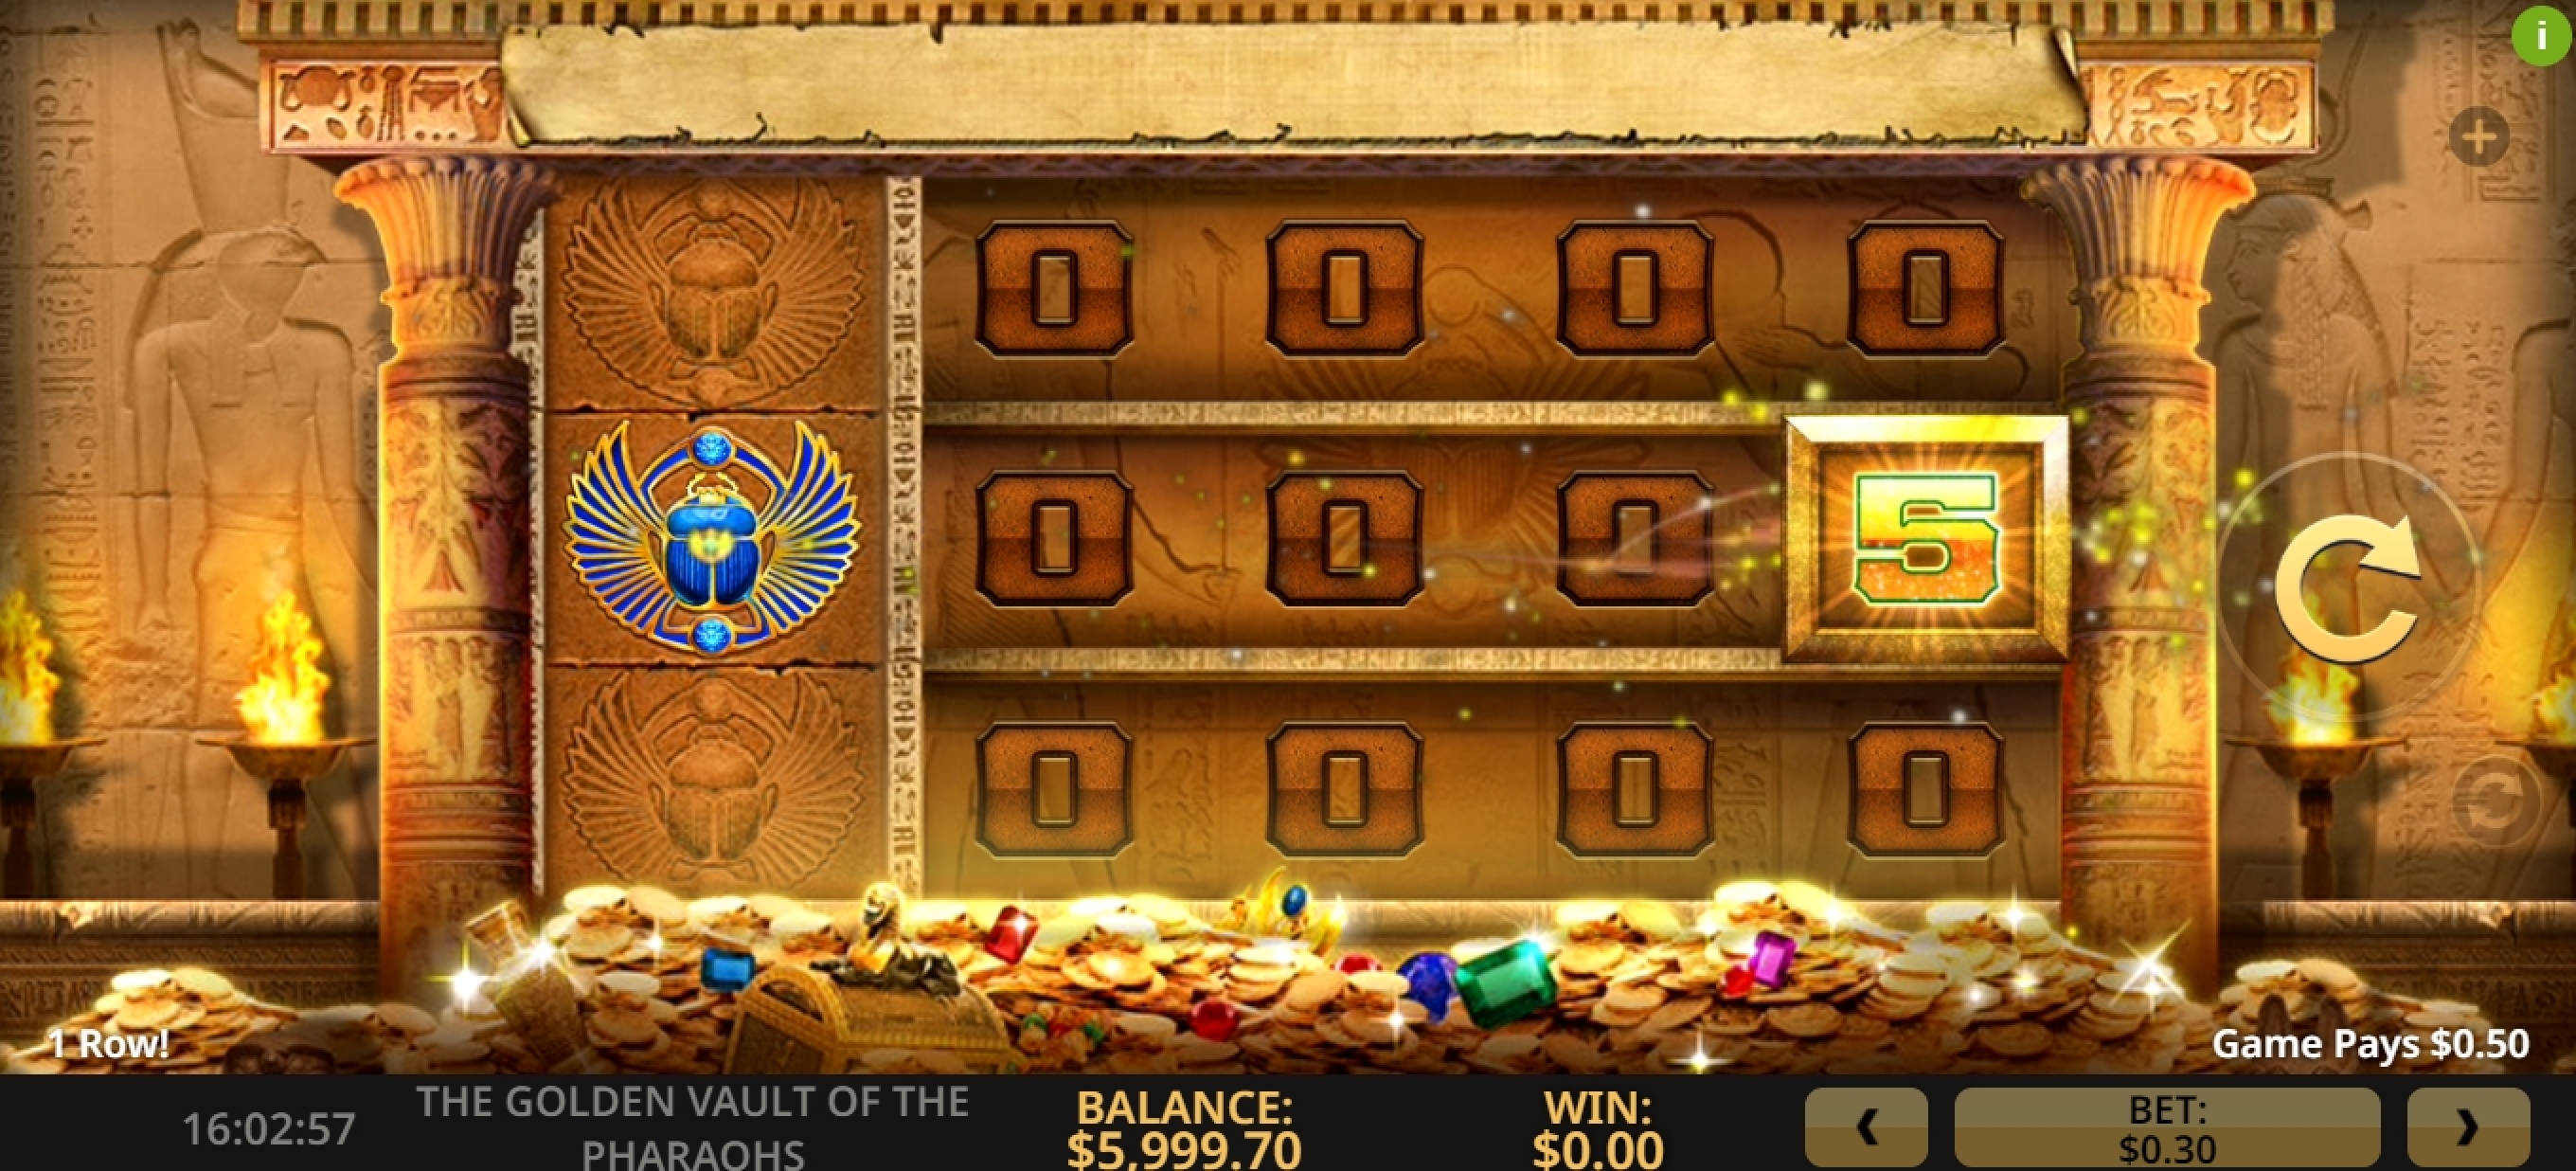 Win Money in The Golden Vault of the Pharaohs Free Slot Game by High 5 Games